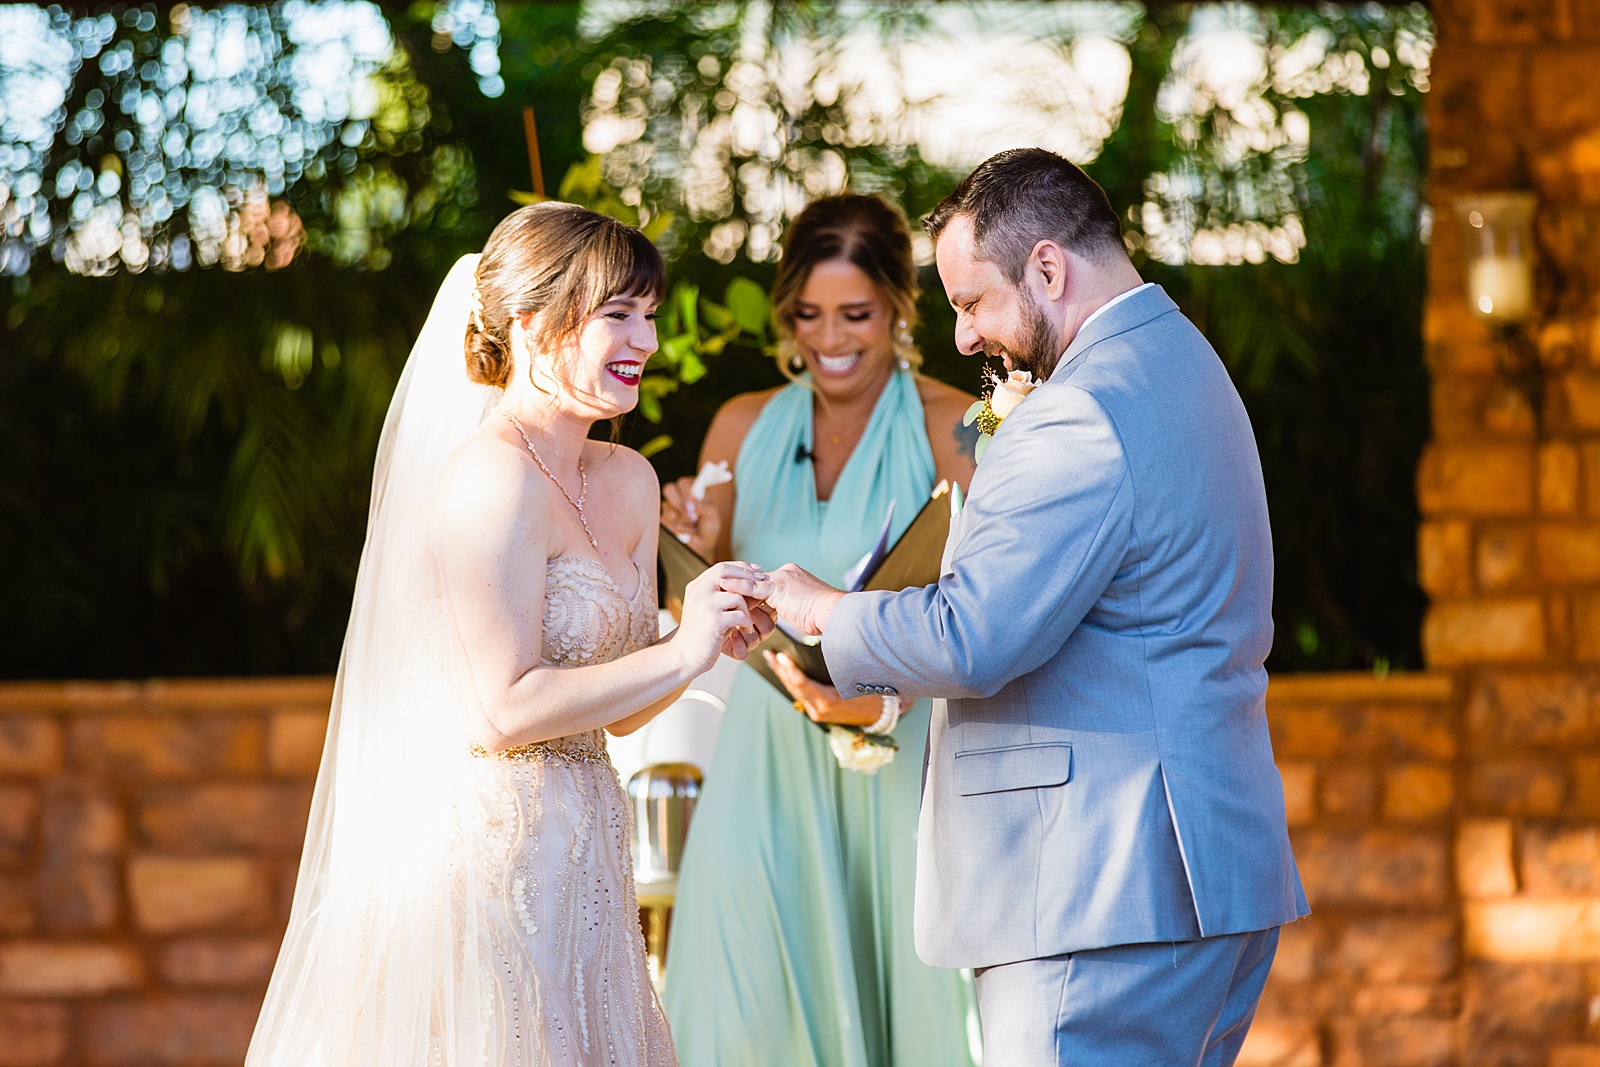 Bride and Groom exchange rings during their wedding ceremony at Bella Rose Estate by Phoenix wedding photographer PMA Photography.